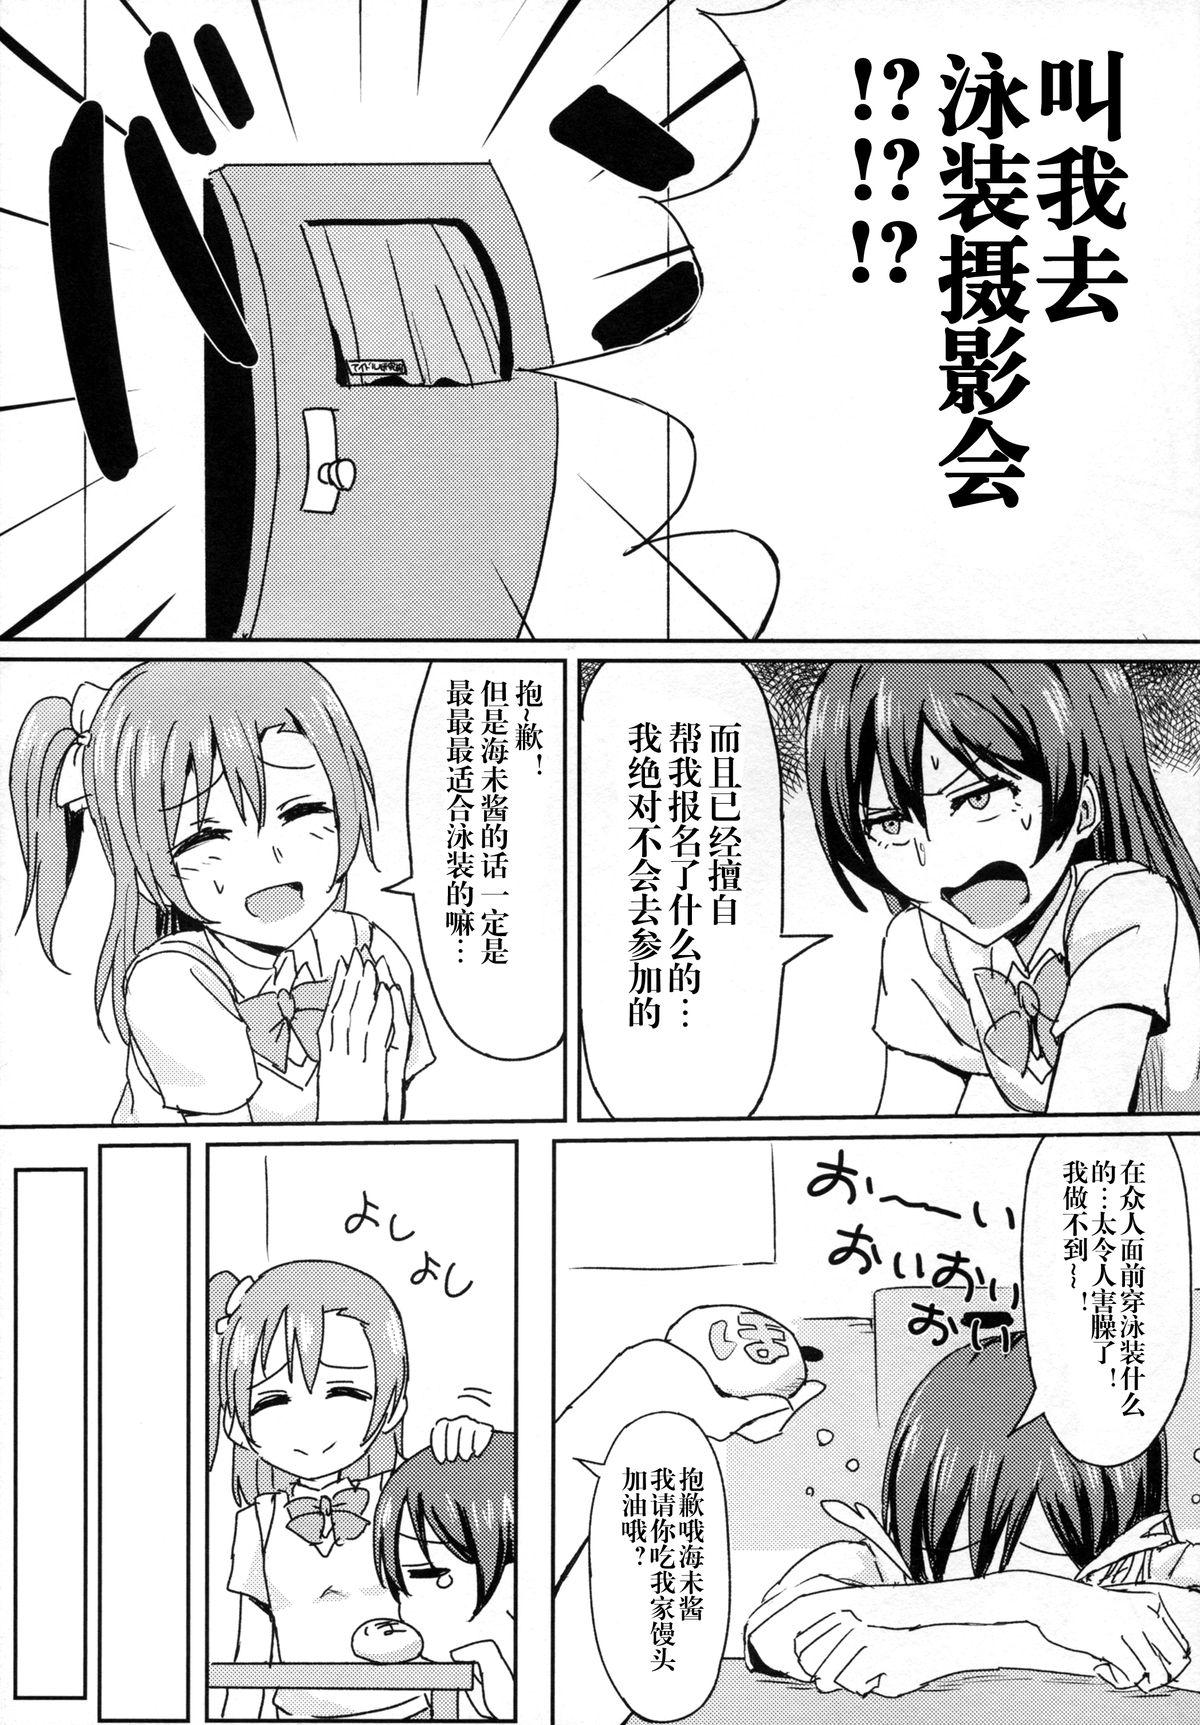 Jav Hah,Wrench This! - Love live Cash - Page 6